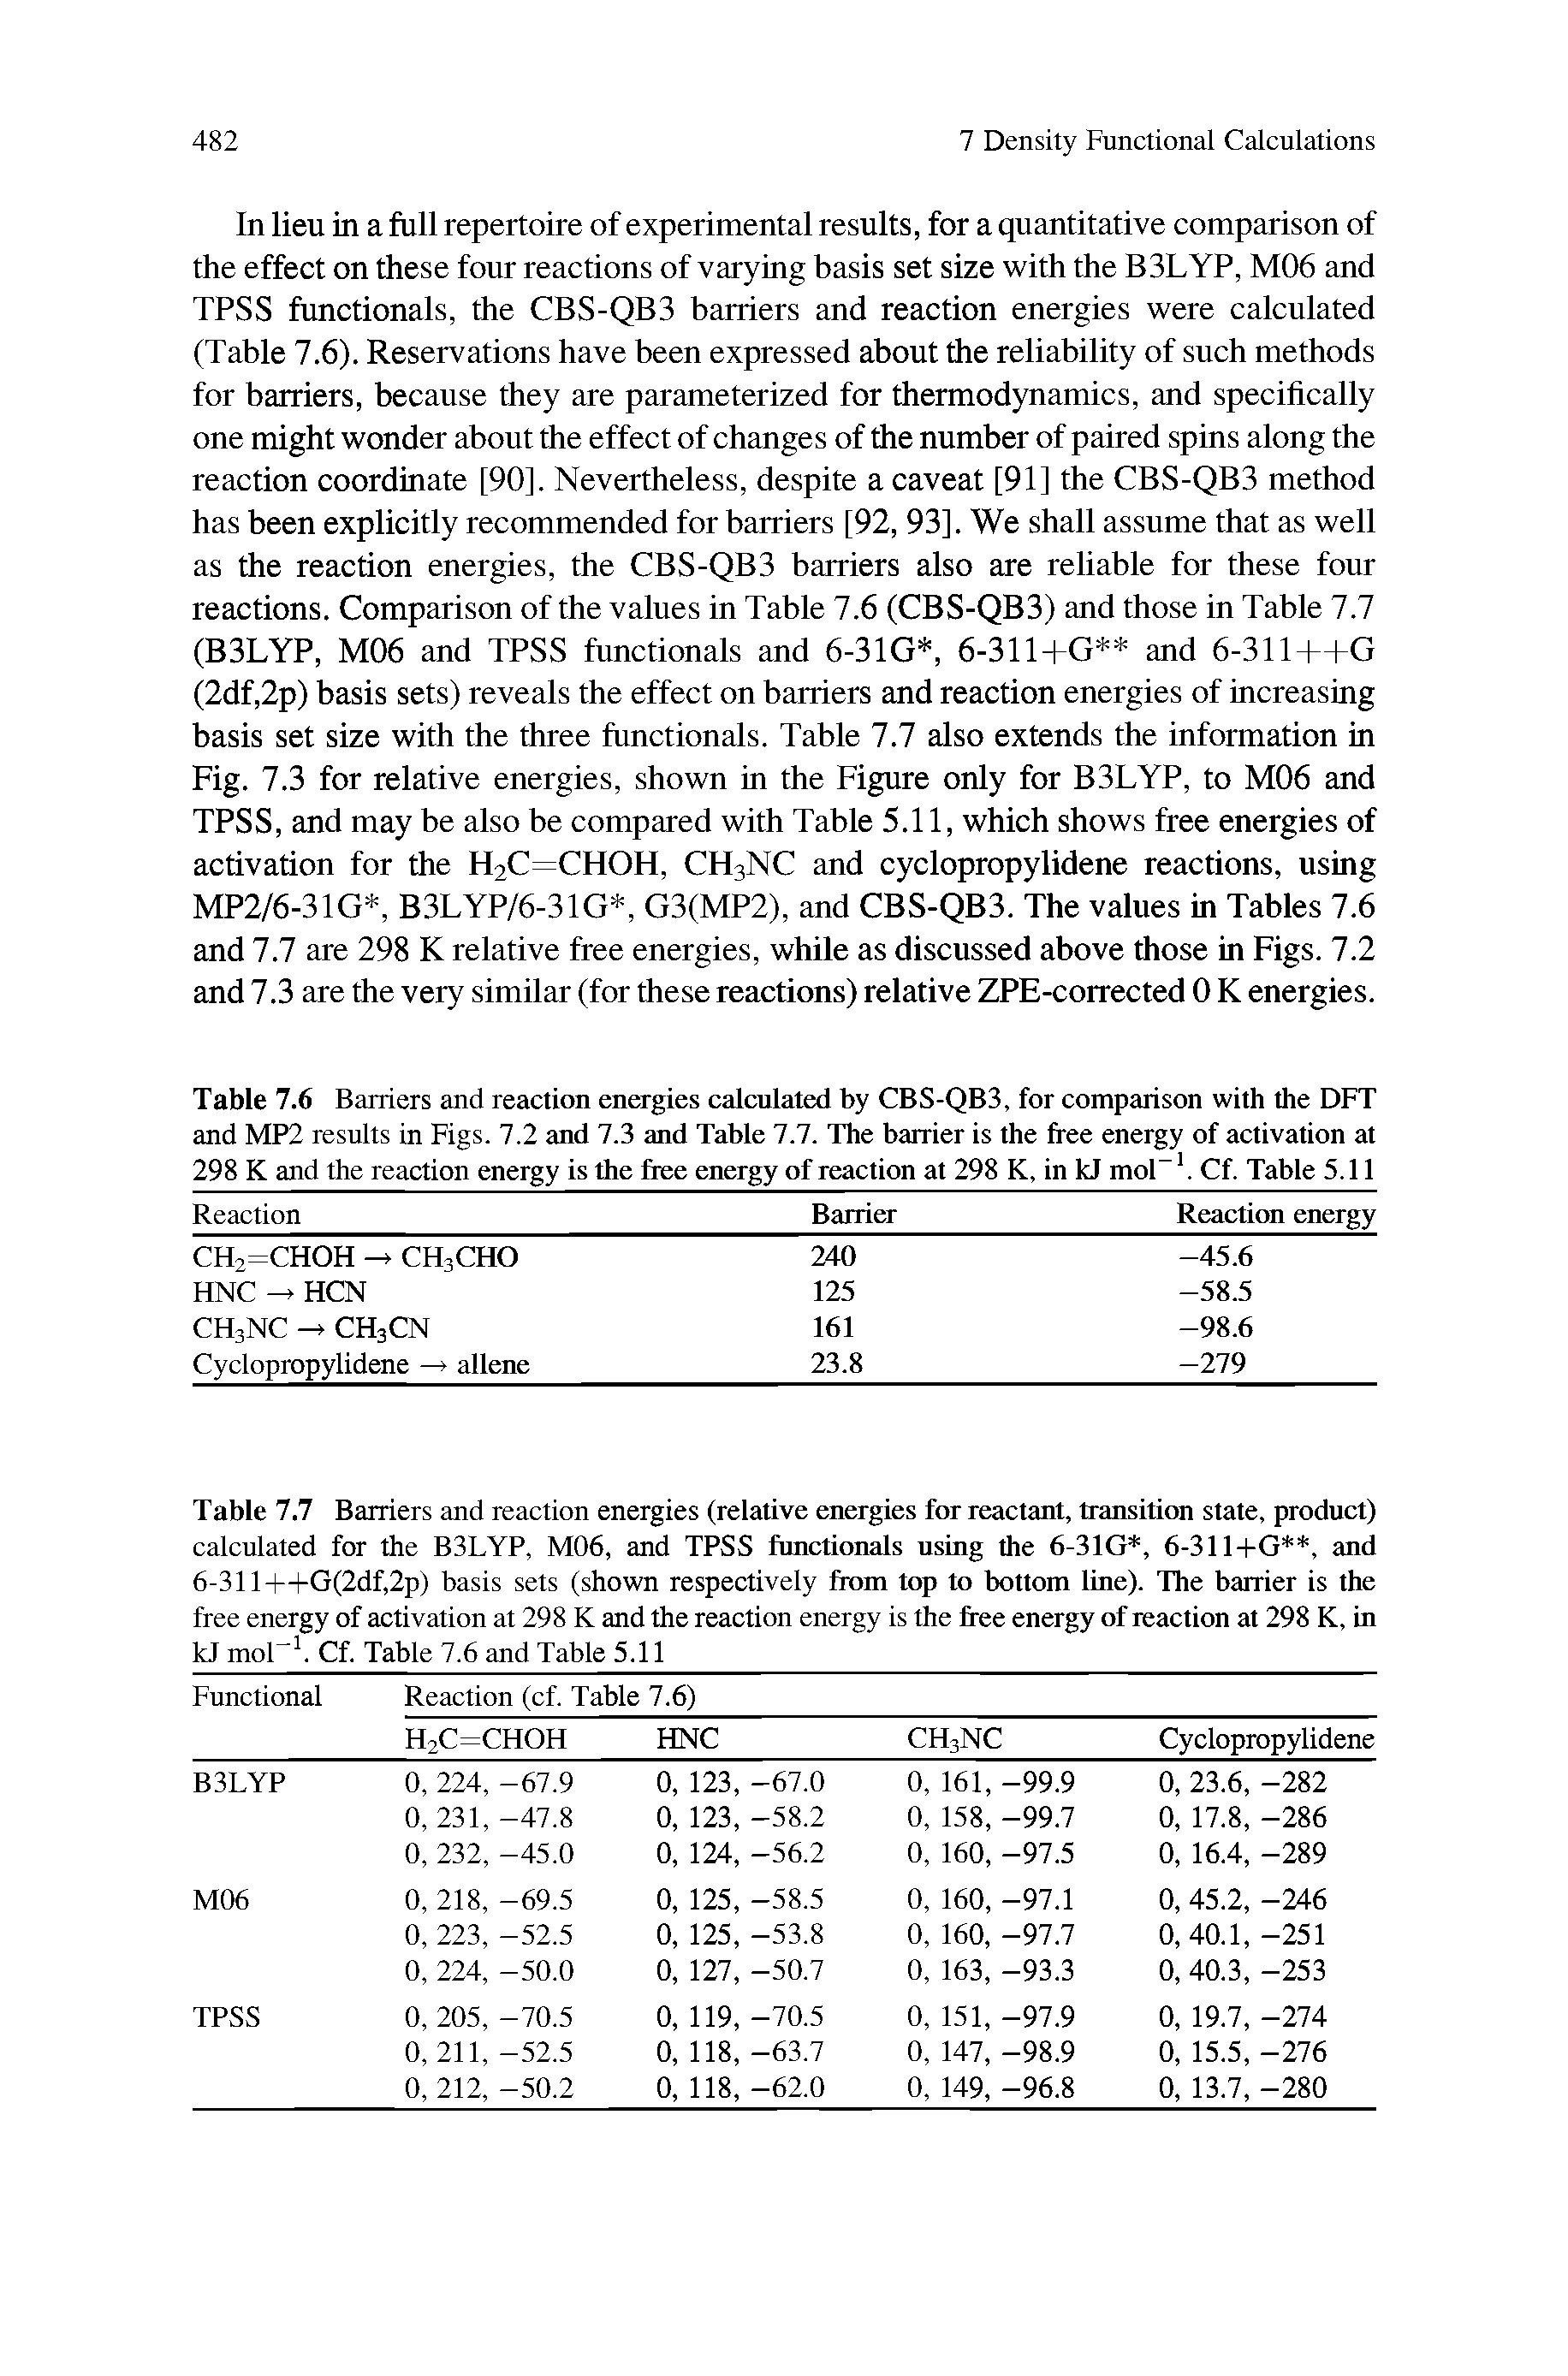 Table 7.6 Barriers and reaction energies calculated by CBS-QB3, for comparison with the DFT and MP2 results in Figs. 7.2 and 7.3 and Table 7.7. The barrier is the free energy of activation at 298 K and the reaction energy is the free energy of reaction at 298 K, in kJ mol-1. Cf. Table 5.11...